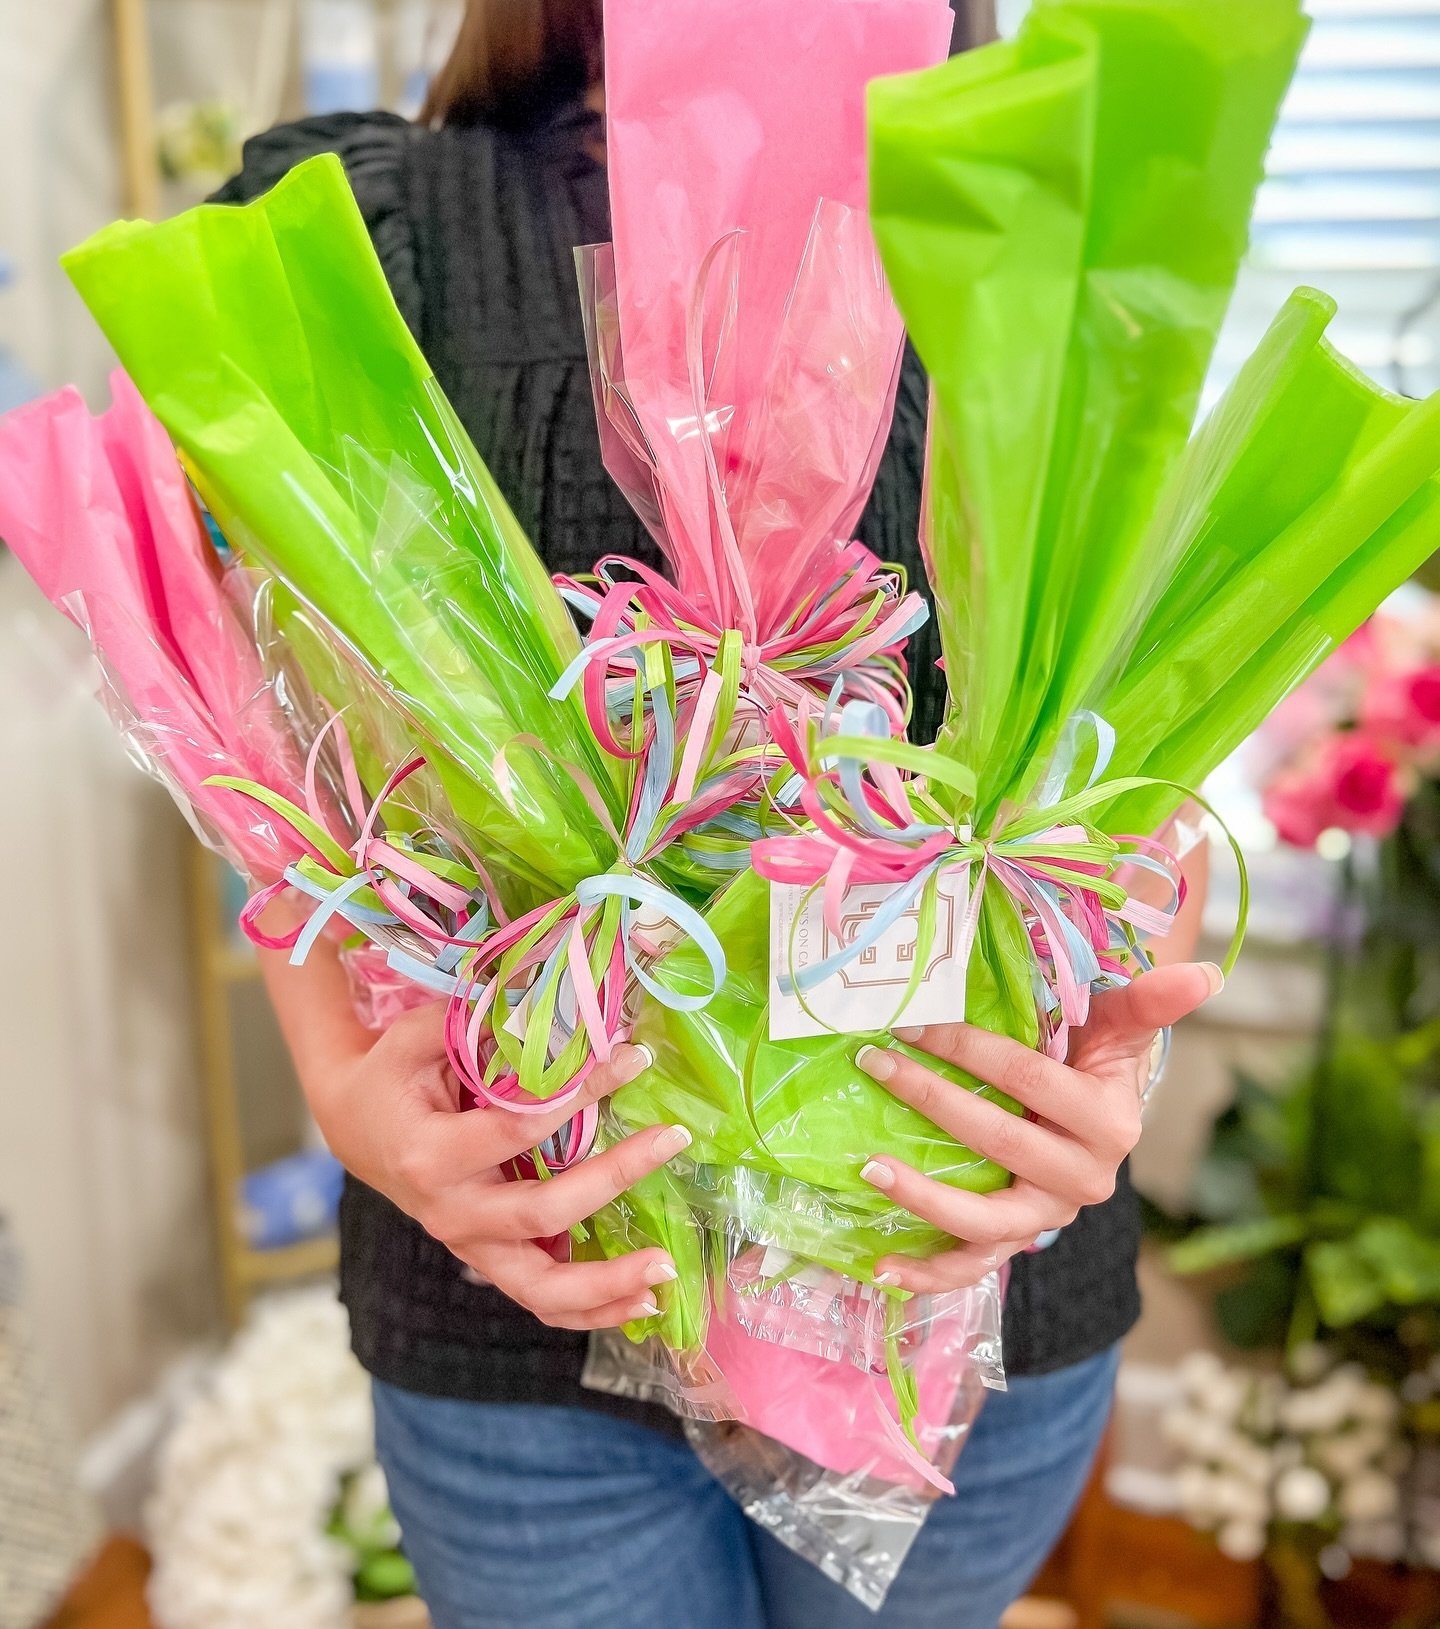 Gifts are rolling out the door!🛍️✨🎁 Stop in for your Mother&rsquo;s Day, graduation, nurses week &amp; teacher appreciation gifts!! 🌸🎓🩺🍎⁣
⁣
𝙊𝙥𝙚𝙣 M-F 11-6 &amp; Sat 11-2.⁣
⁣
Carmen&rsquo;s on Carolina⁣
1631 Carolina Ave ⁣
Orangeburg, SC⁣